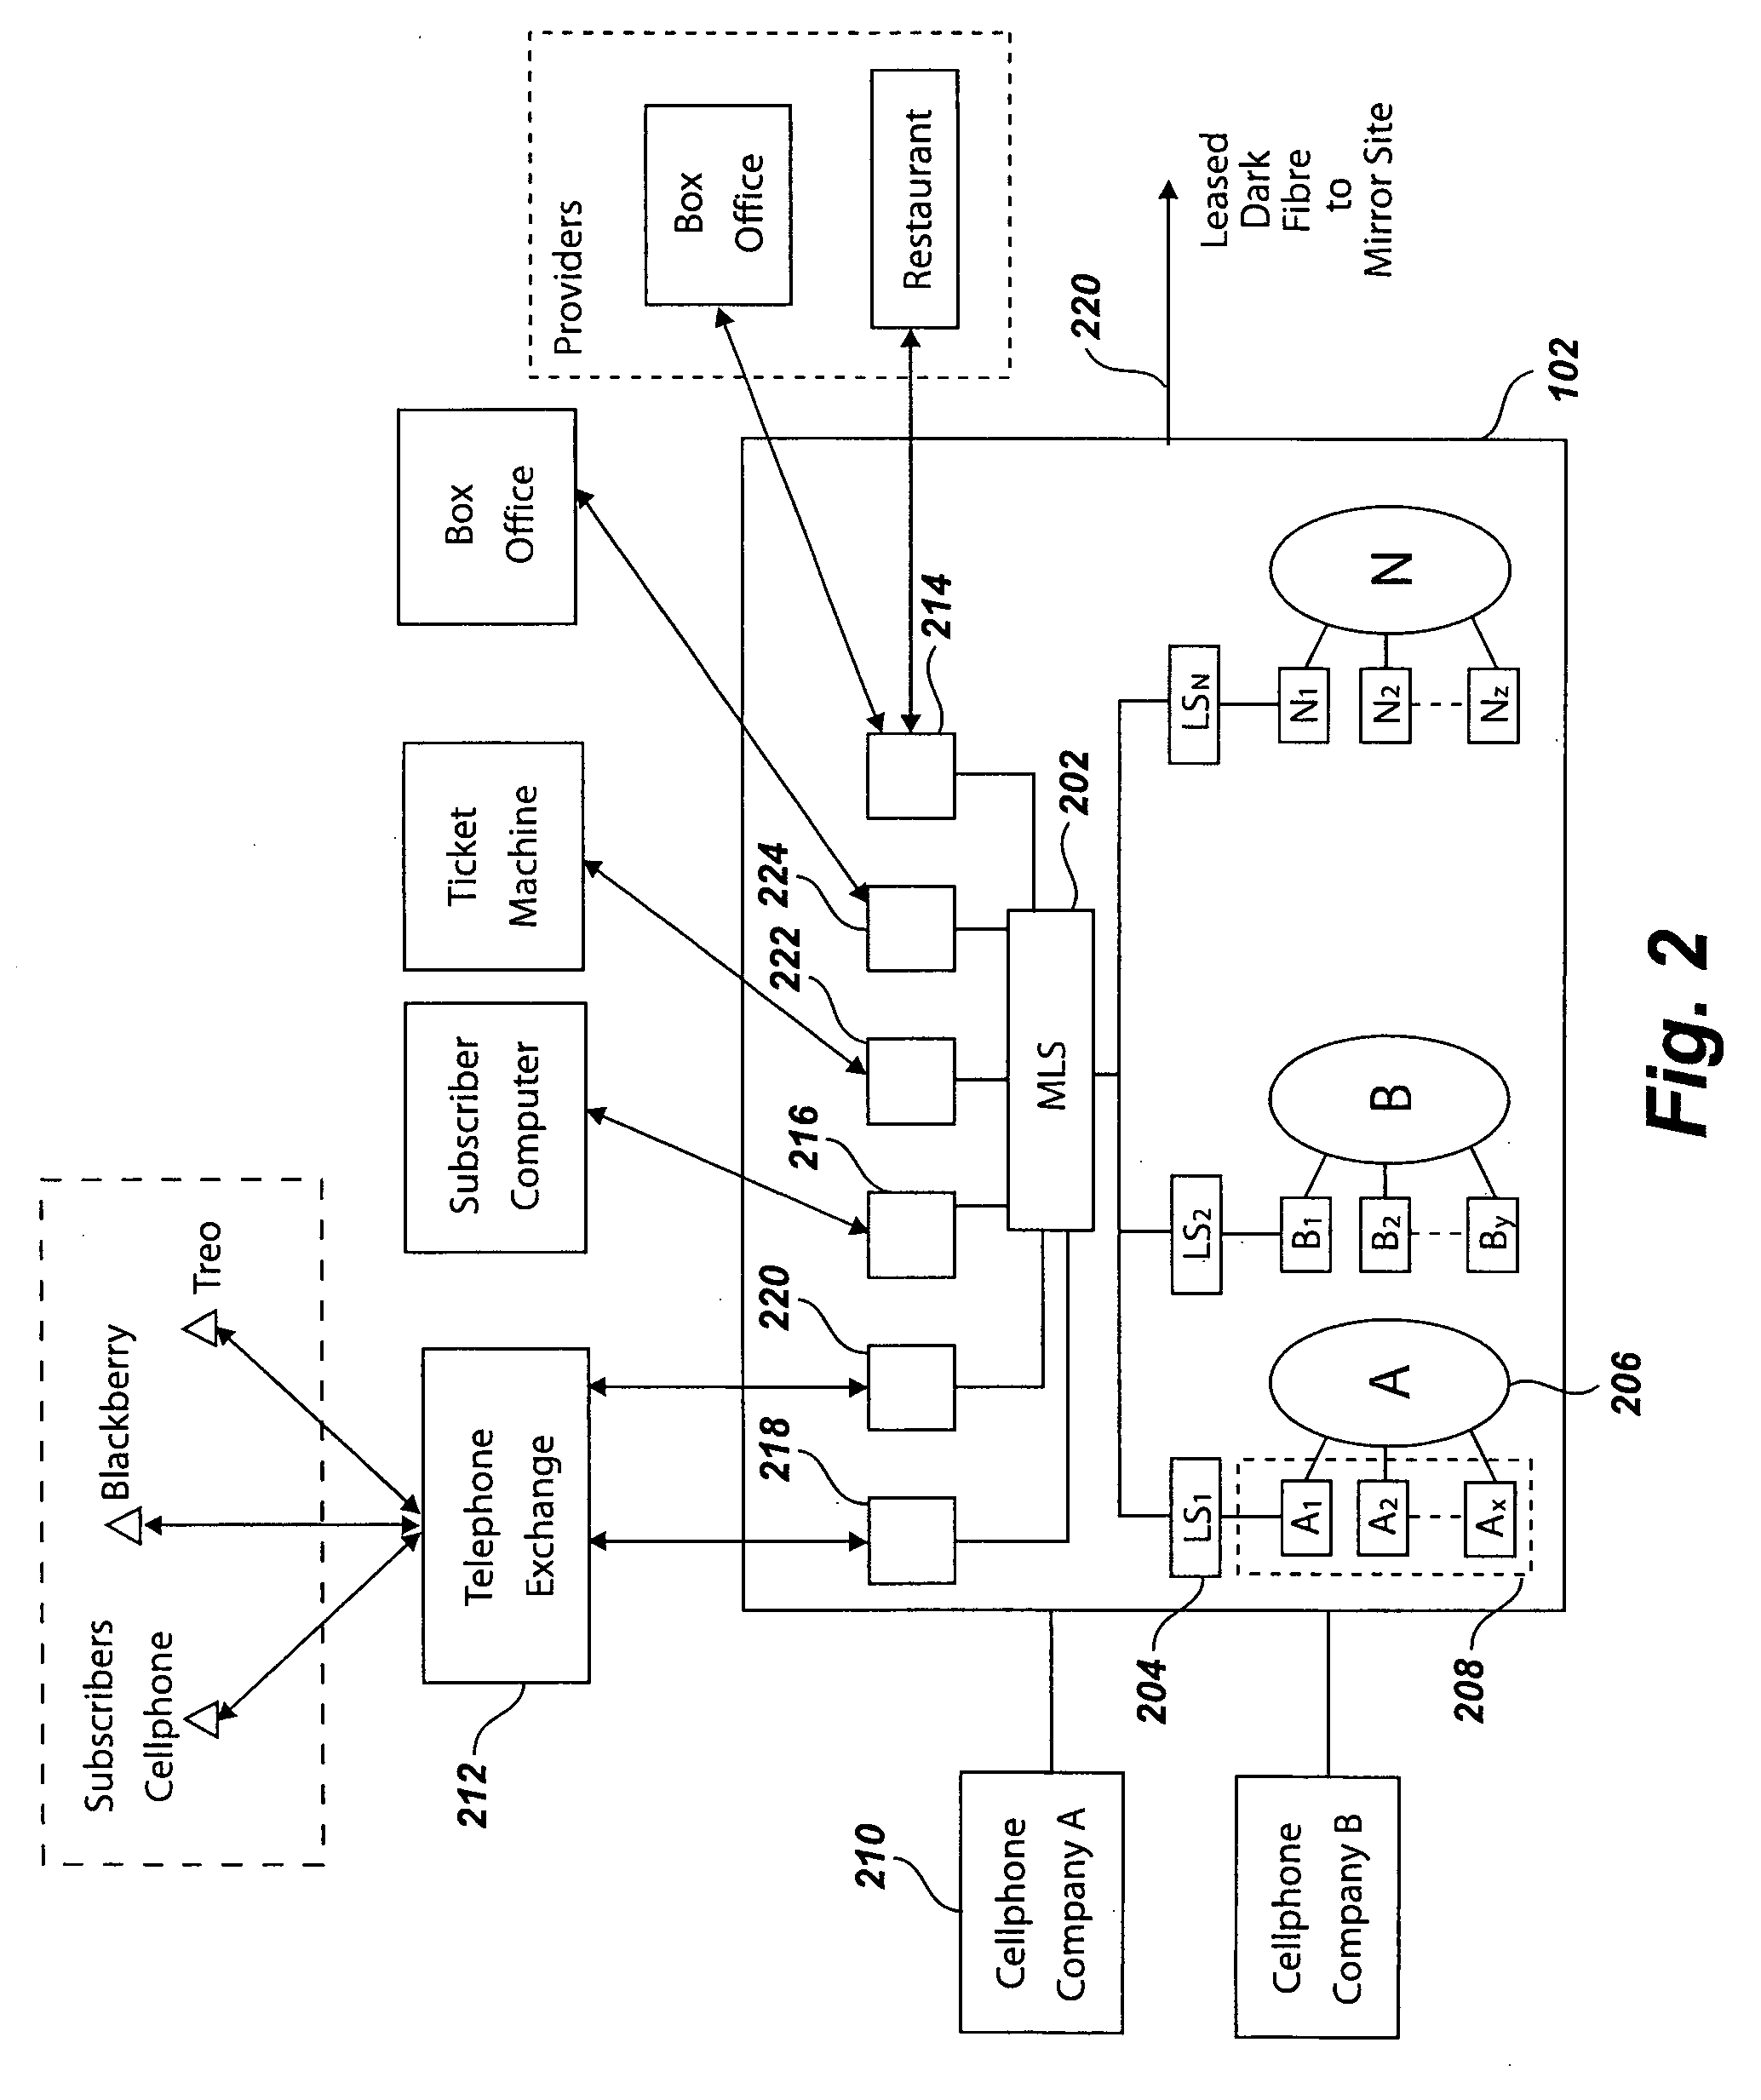 Integrated reservation and ticketing system